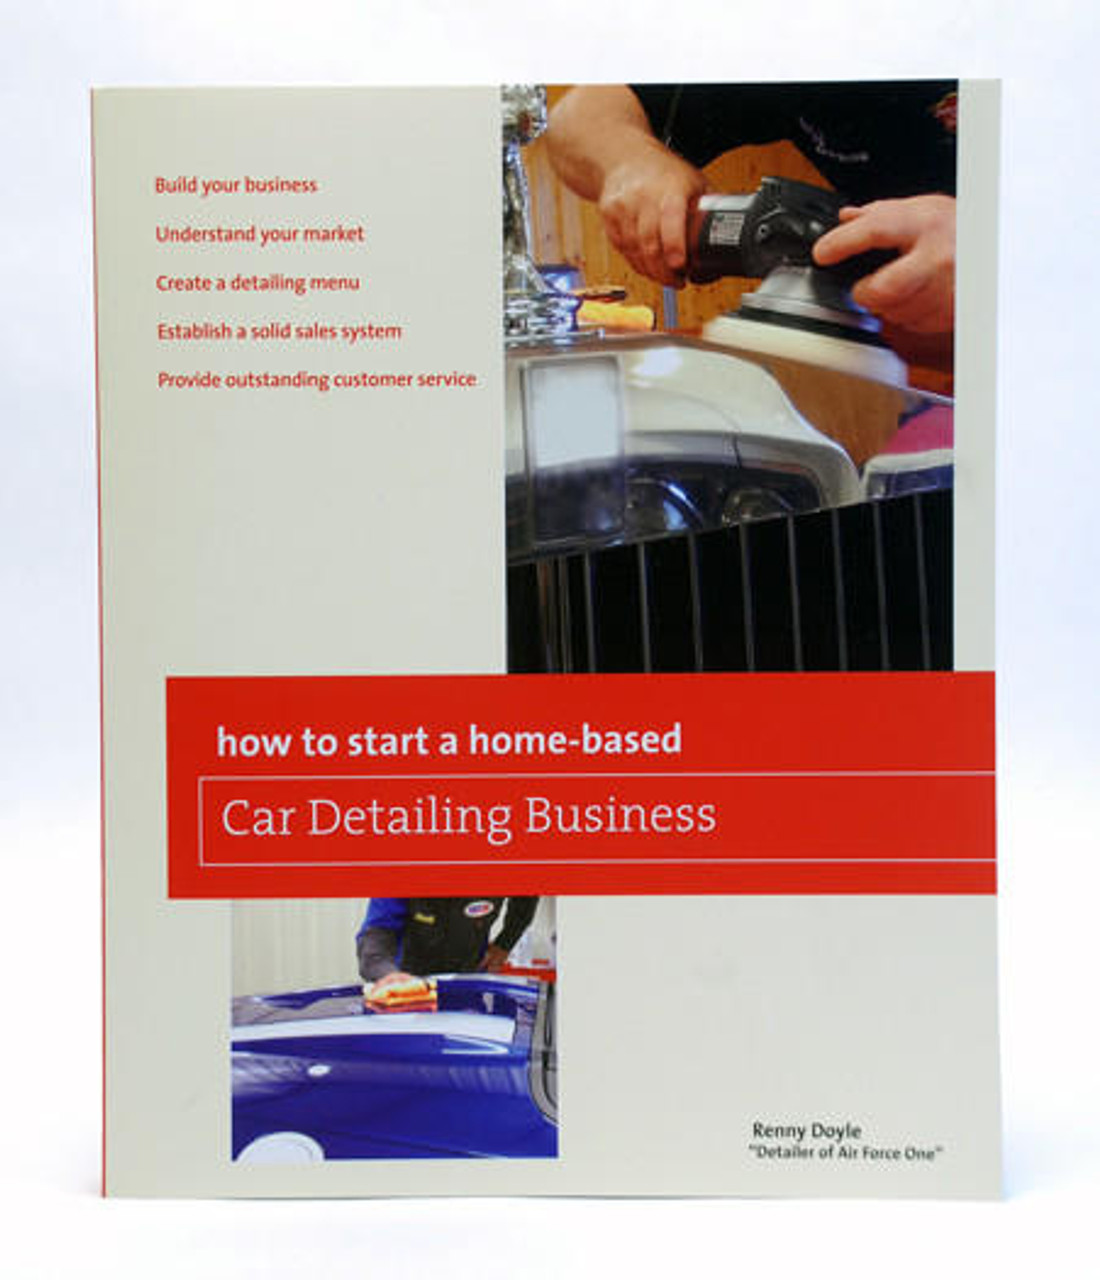 howto How to Start a Home-based Car Detailing Business